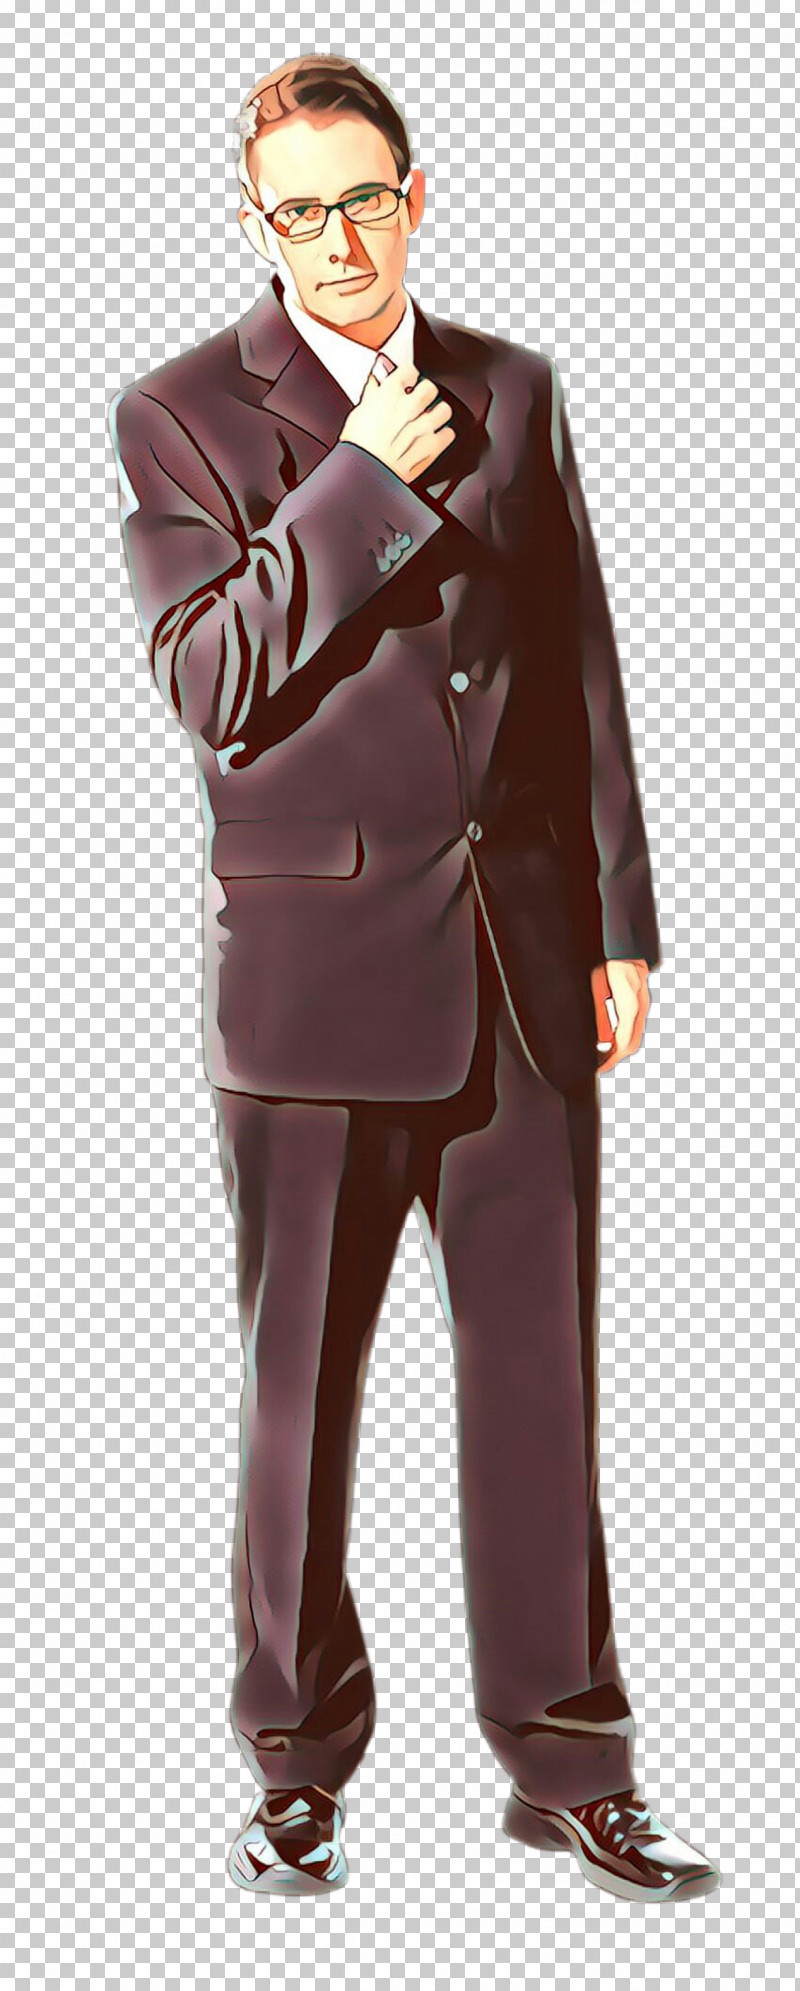 Standing Clothing Suit Brown Outerwear PNG, Clipart, Brown, Clothing, Costume, Formal Wear, Outerwear Free PNG Download